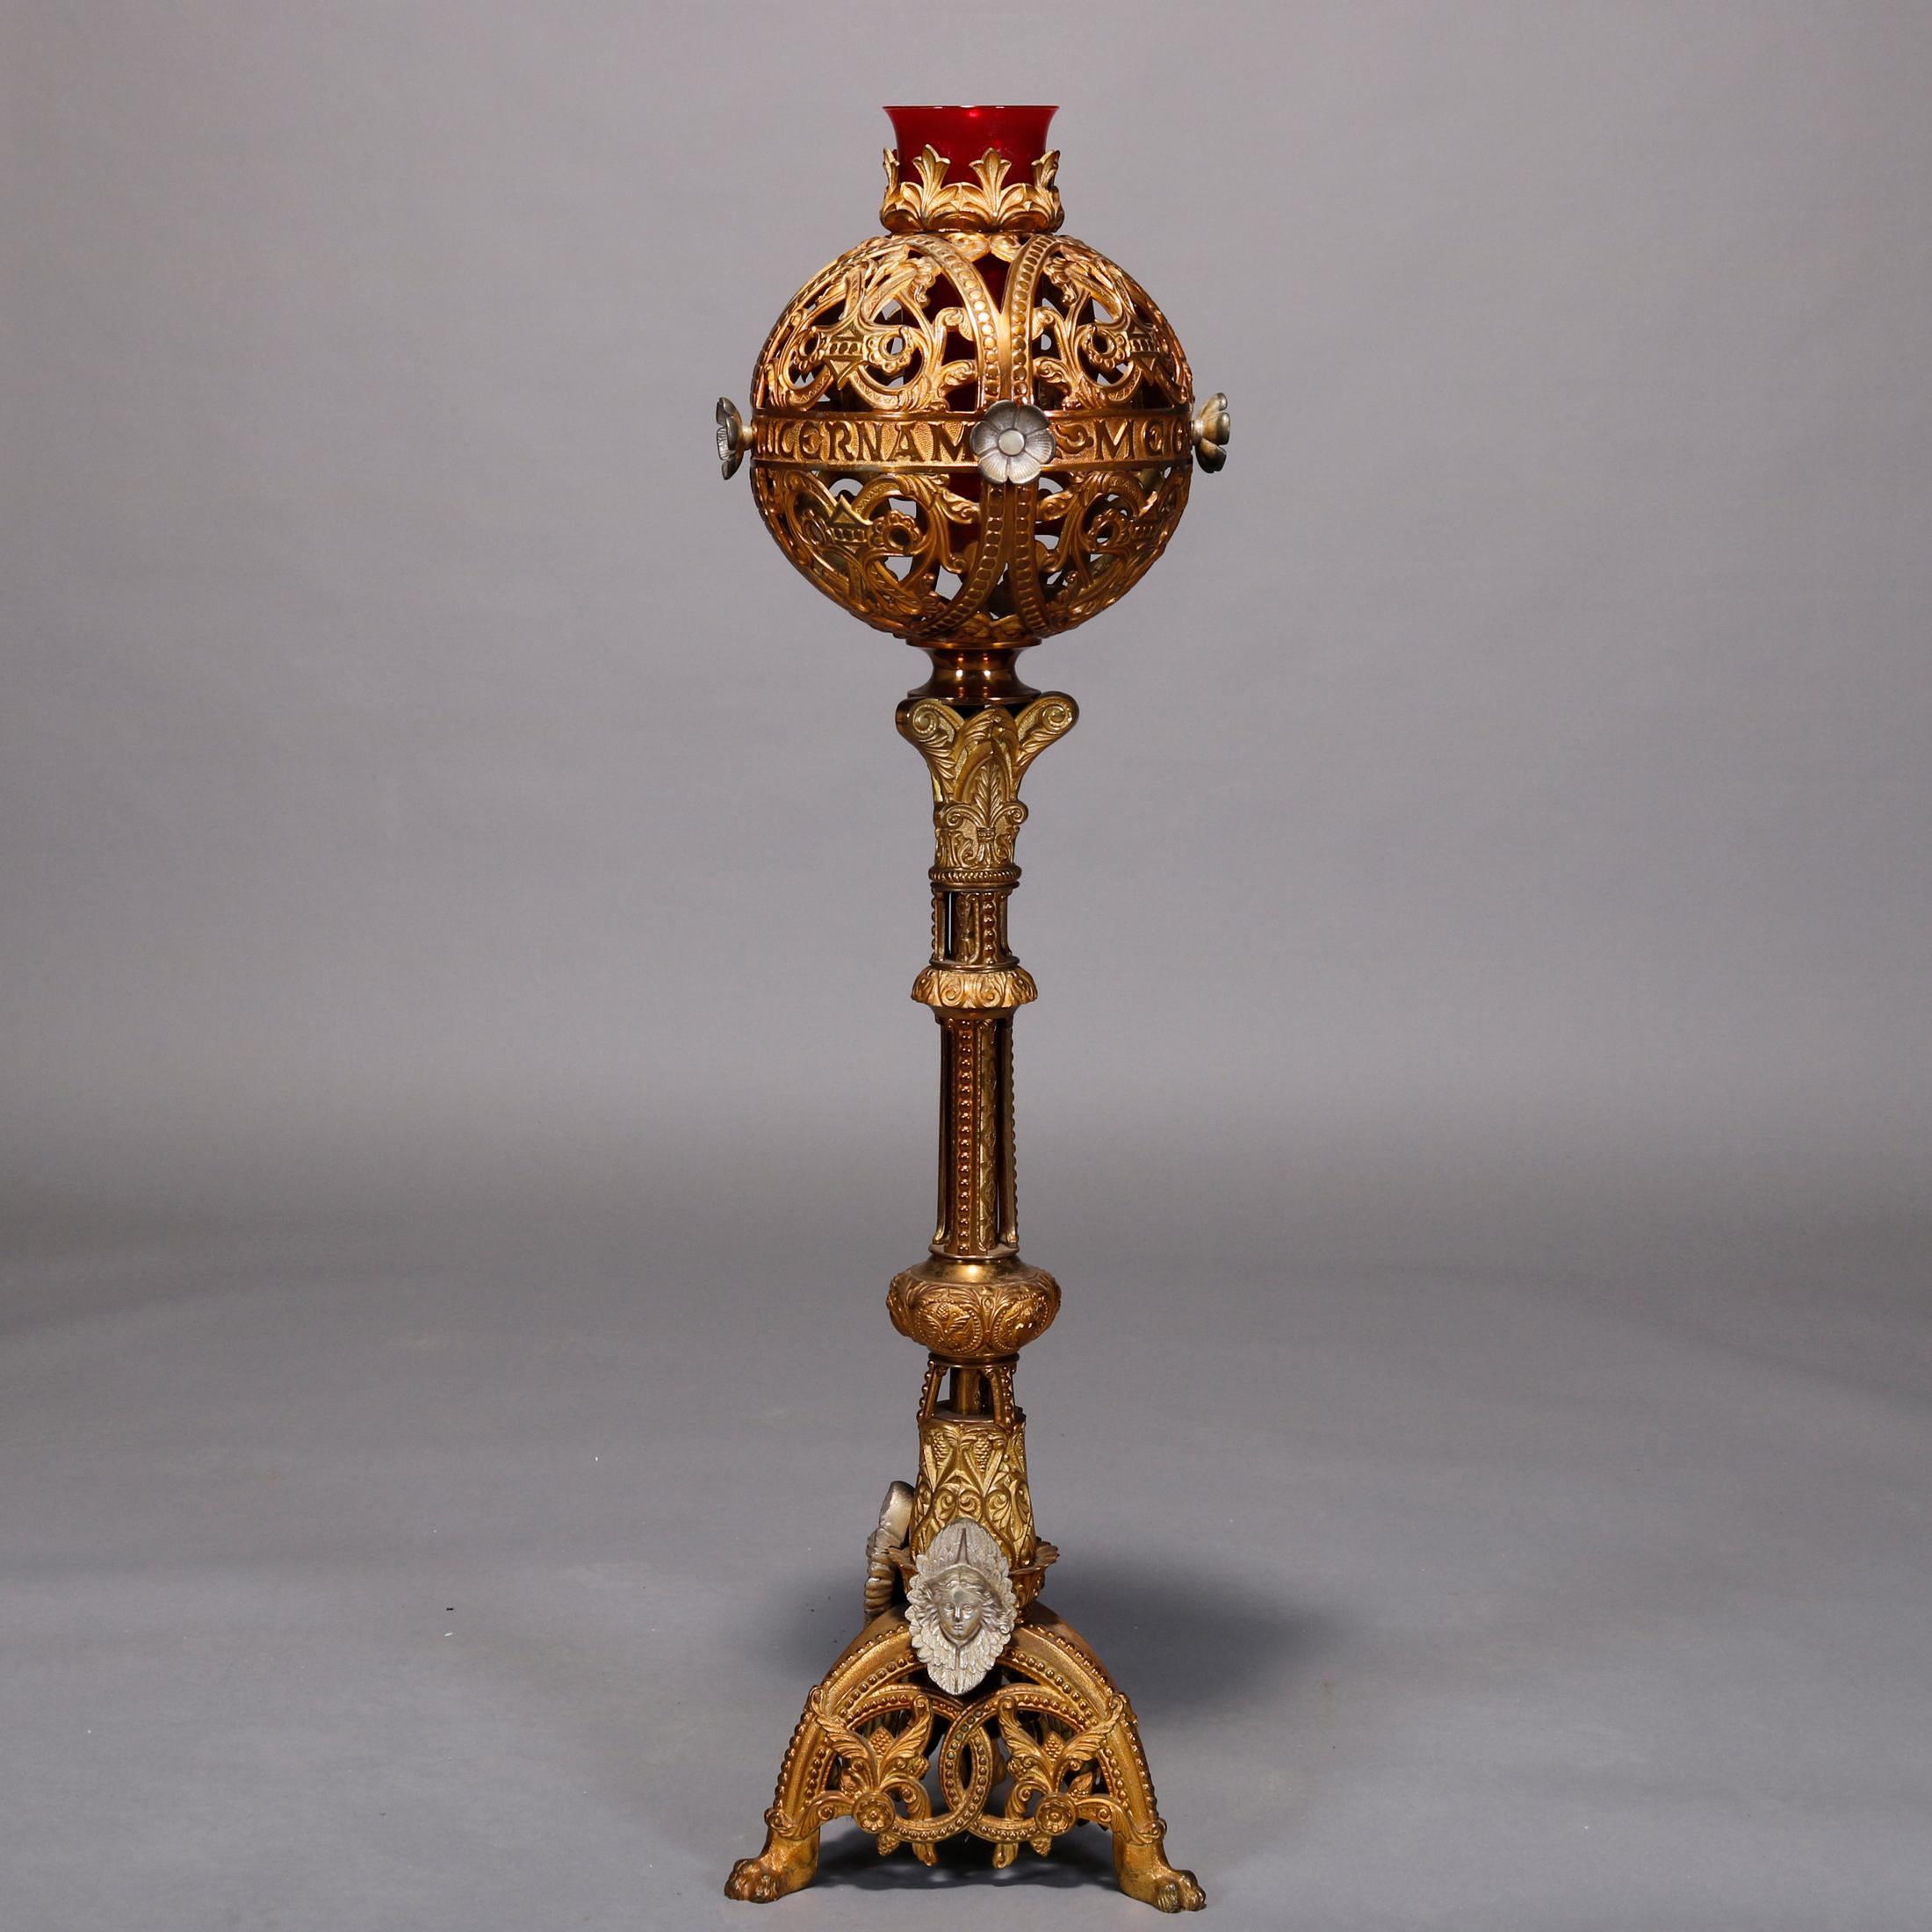 An antique Roman Catholic Gothic monstrance offers gilt bronze construction with pierced globe having scroll and foliate elements and housing ruby glass candle receptacle, surmounting ornate column raised on base with three legs with masks, foliate